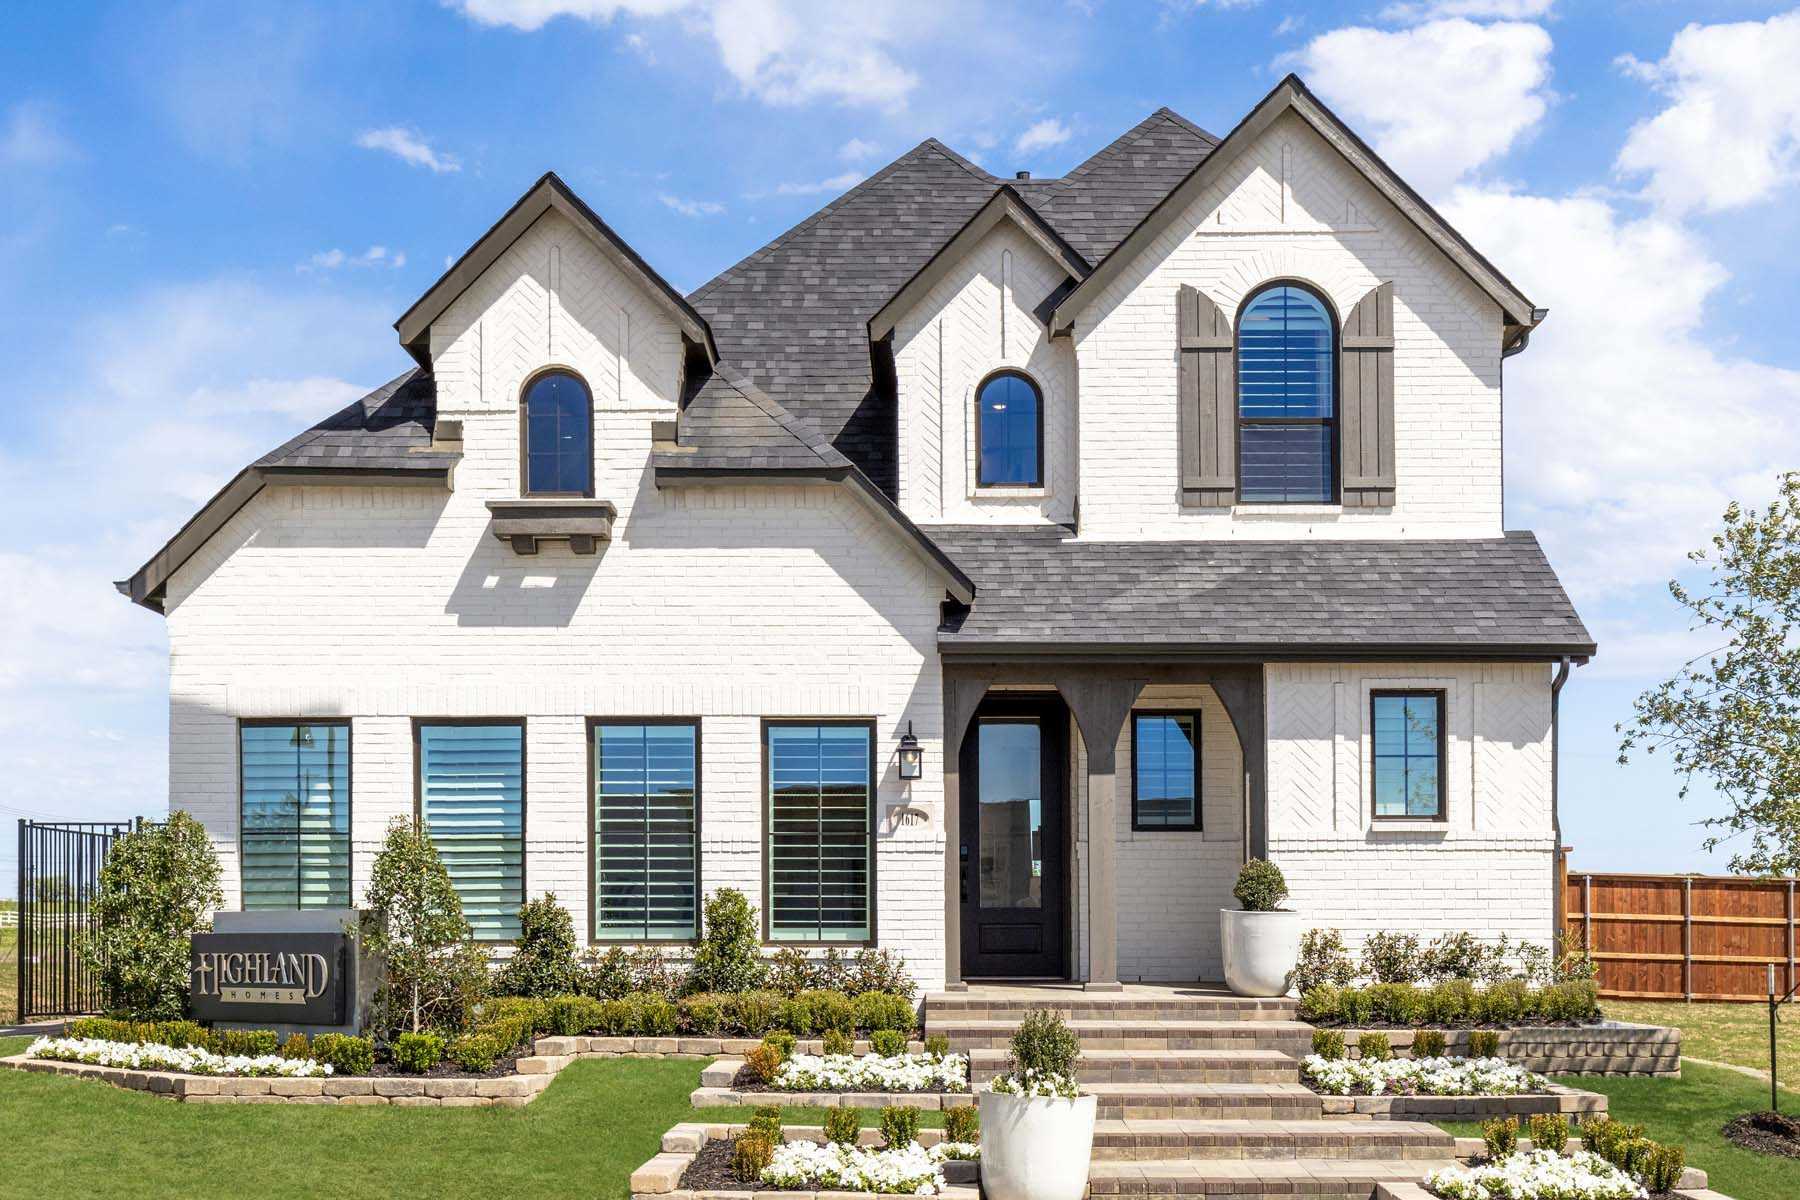 Visit our model home!